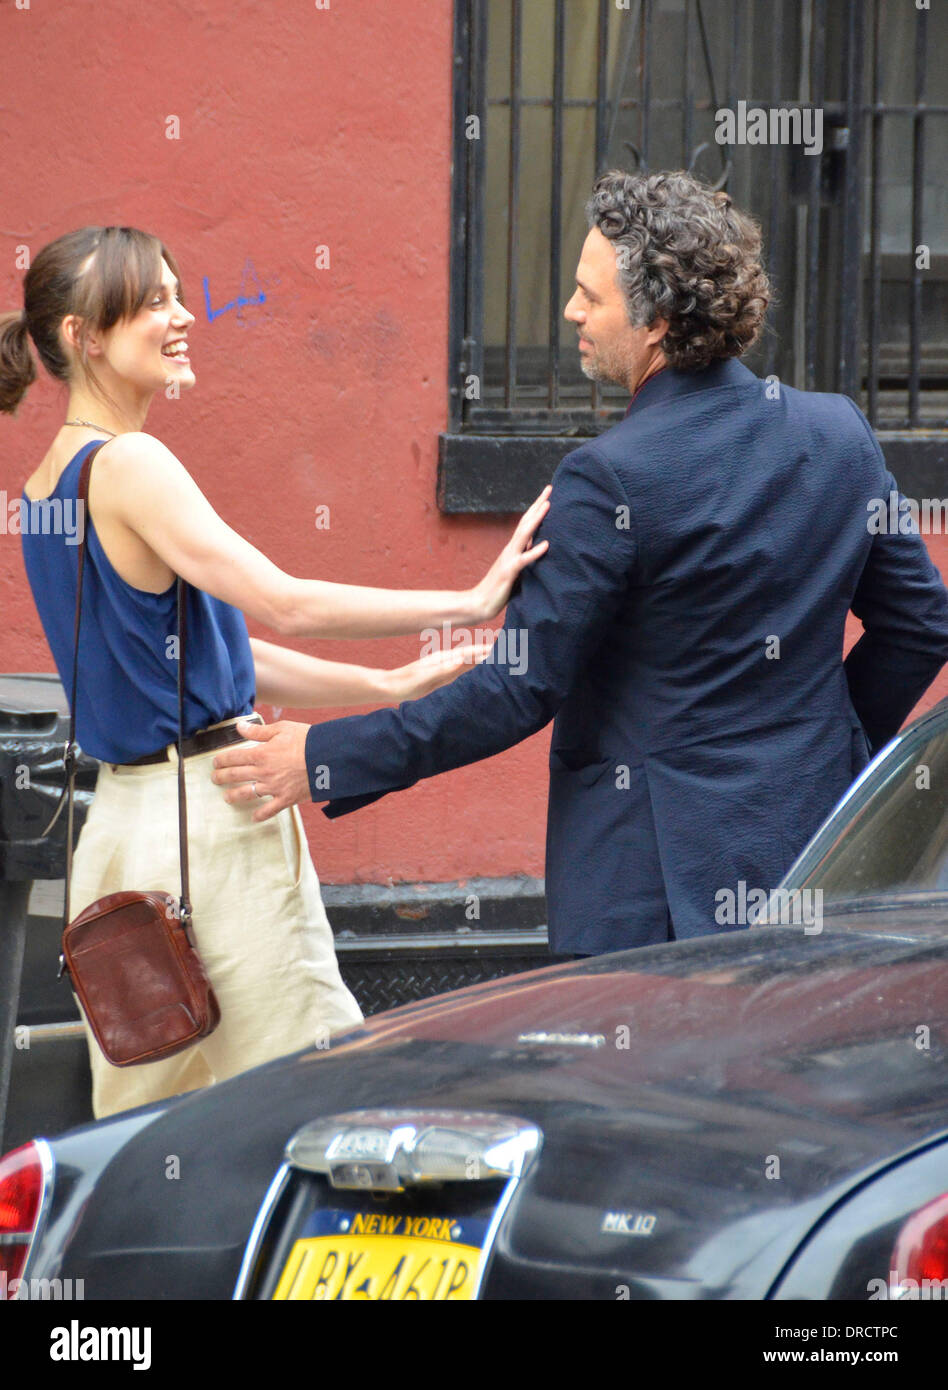 Keira Knightley and Mark Ruffalo  on the set of new movie 'Can A Song Save Your Life?' New York City, USA - 19.07.12 Stock Photo